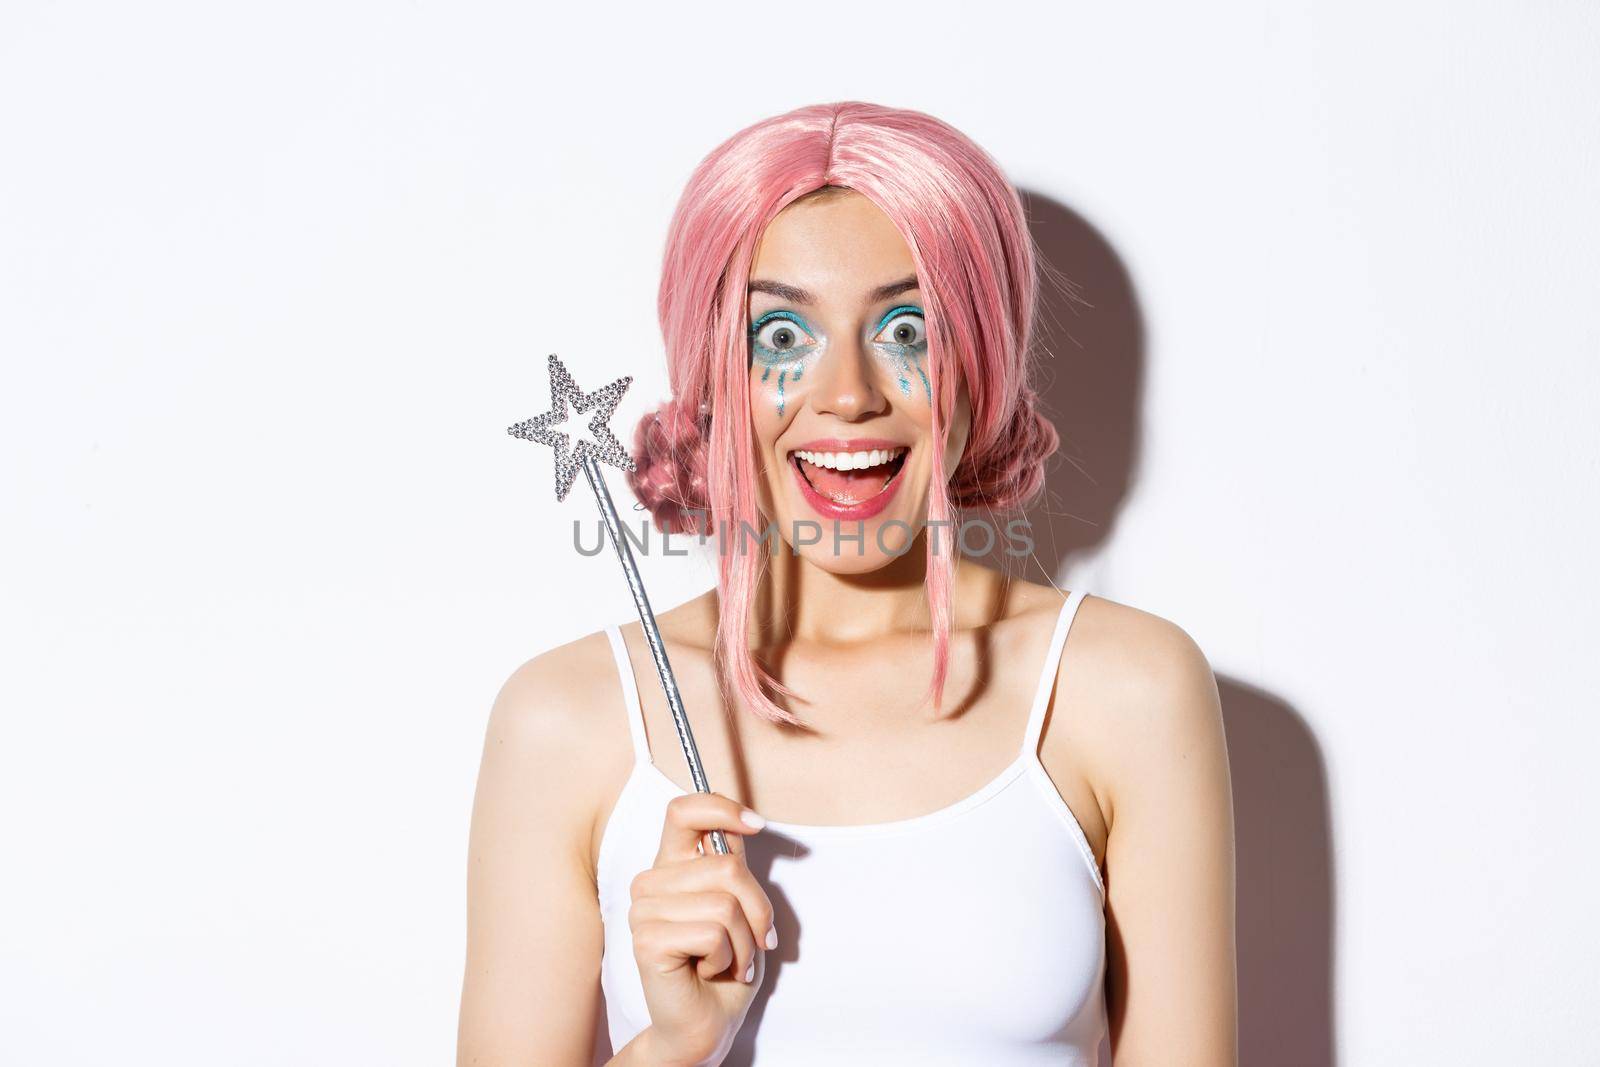 Close-up of surprised happy girl in halloween costume of fairy, holding magic wand and smiling amazed at camera, standing over white background.